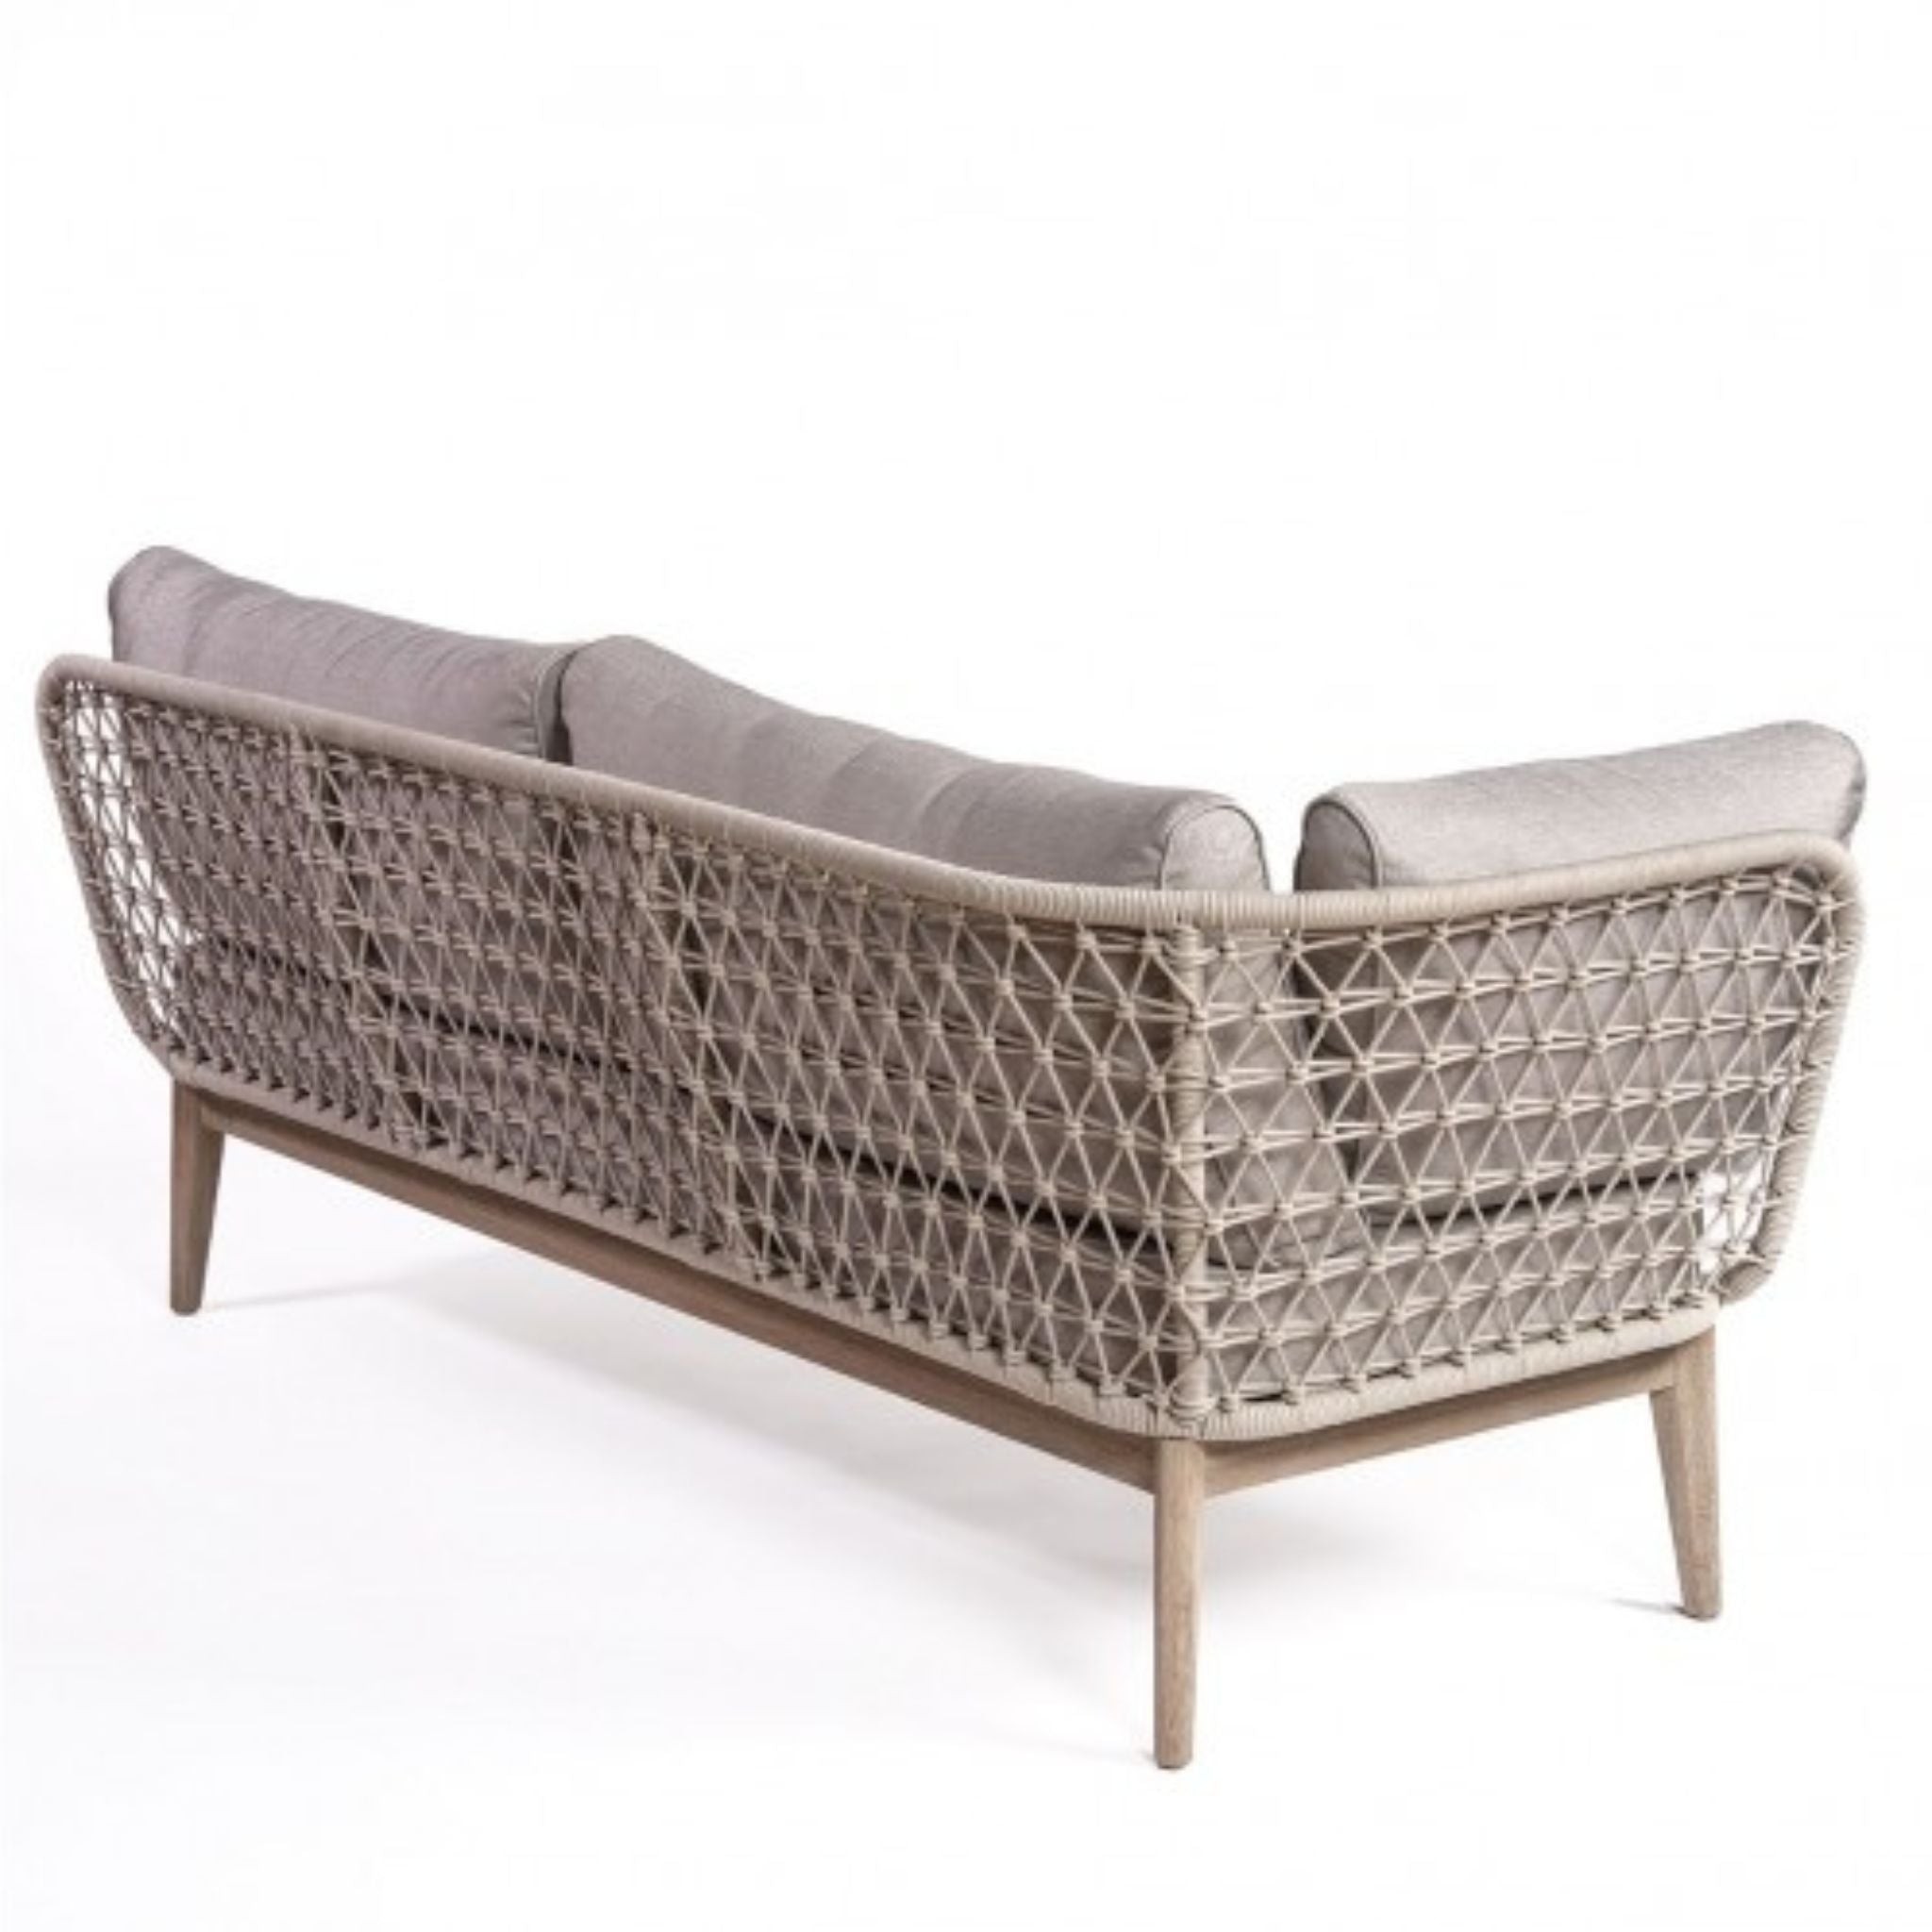 Crisal Decoracion Osana-2 Outdoor Sofa with One Arm Wood and Greyish White Rope - ModernistaLiving